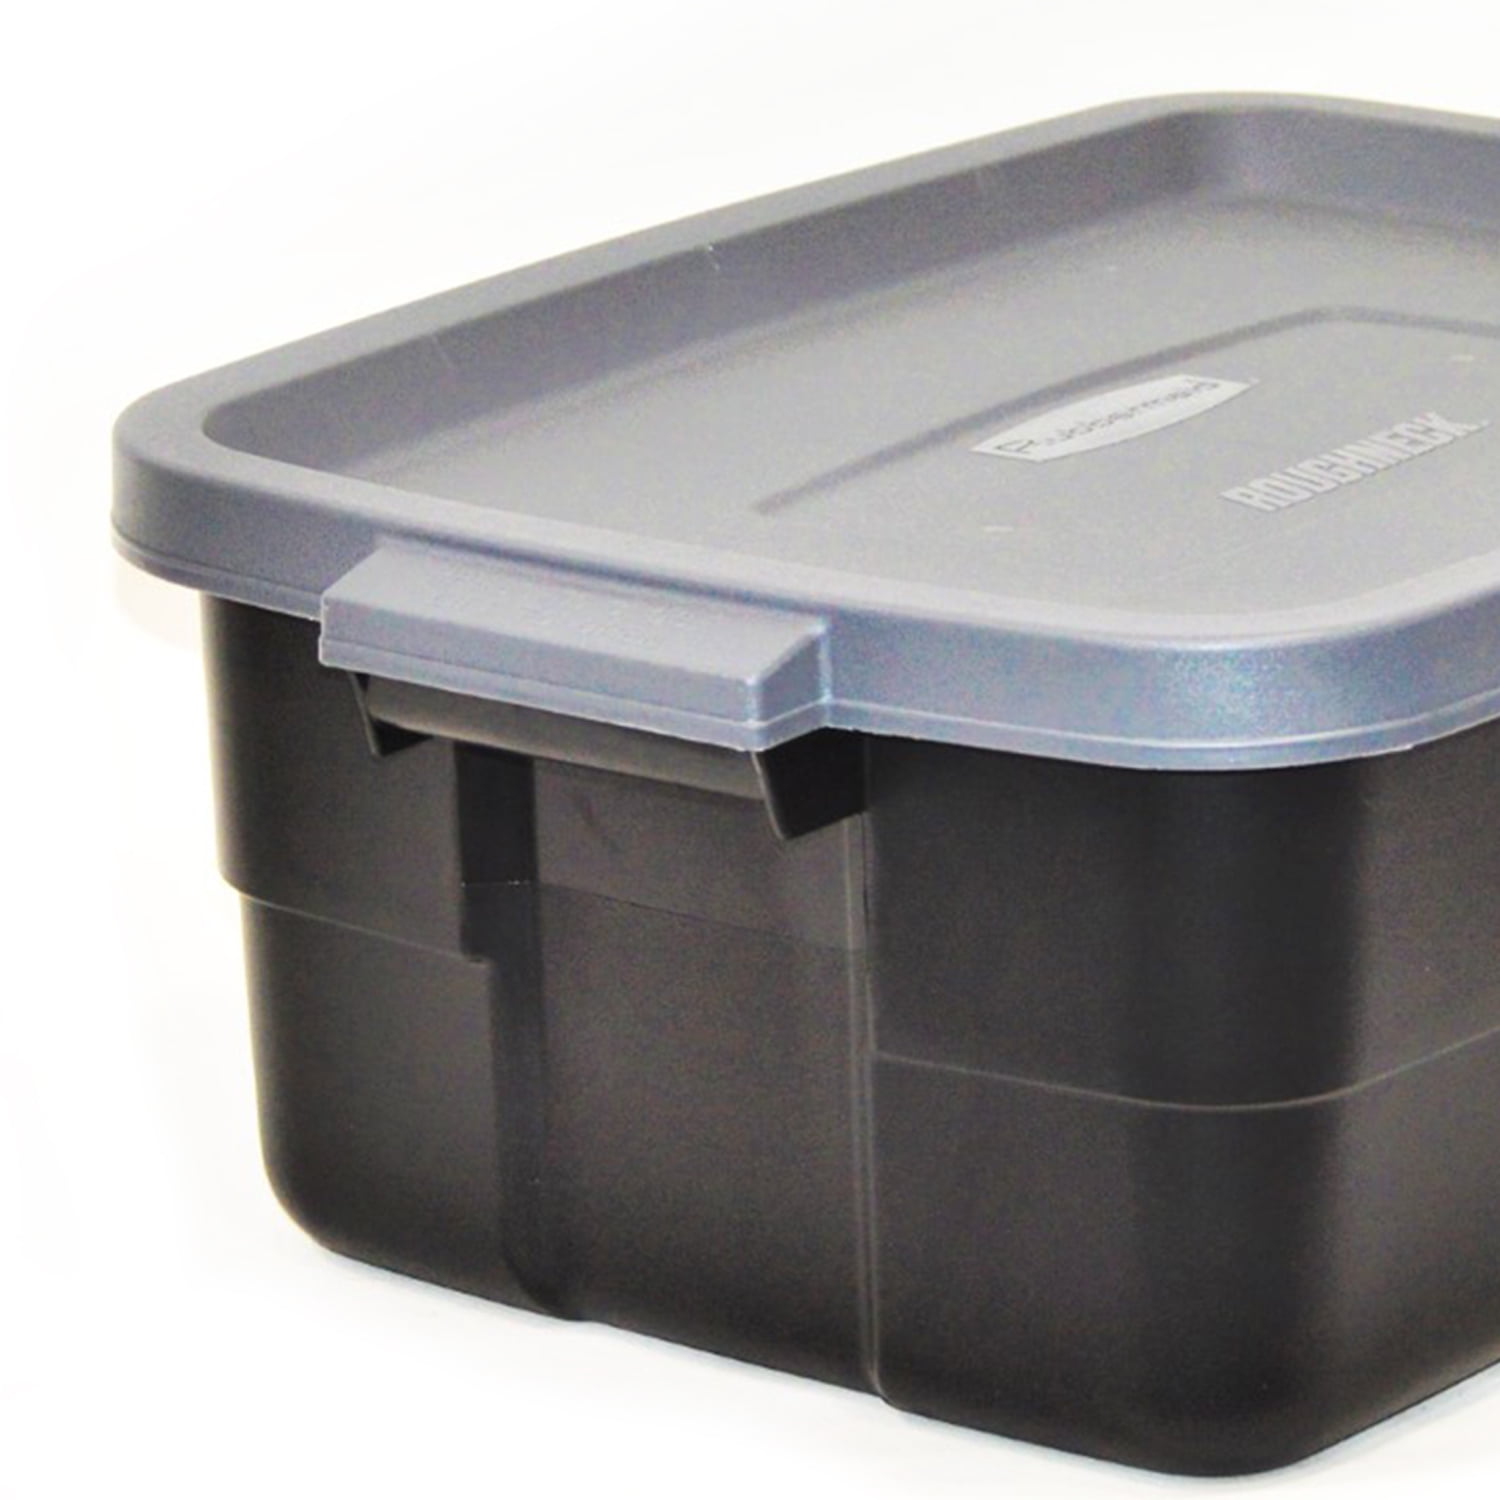 Rubbermaid 6137053 3 gal Roughneck Storage Box Gray Pack of 12 